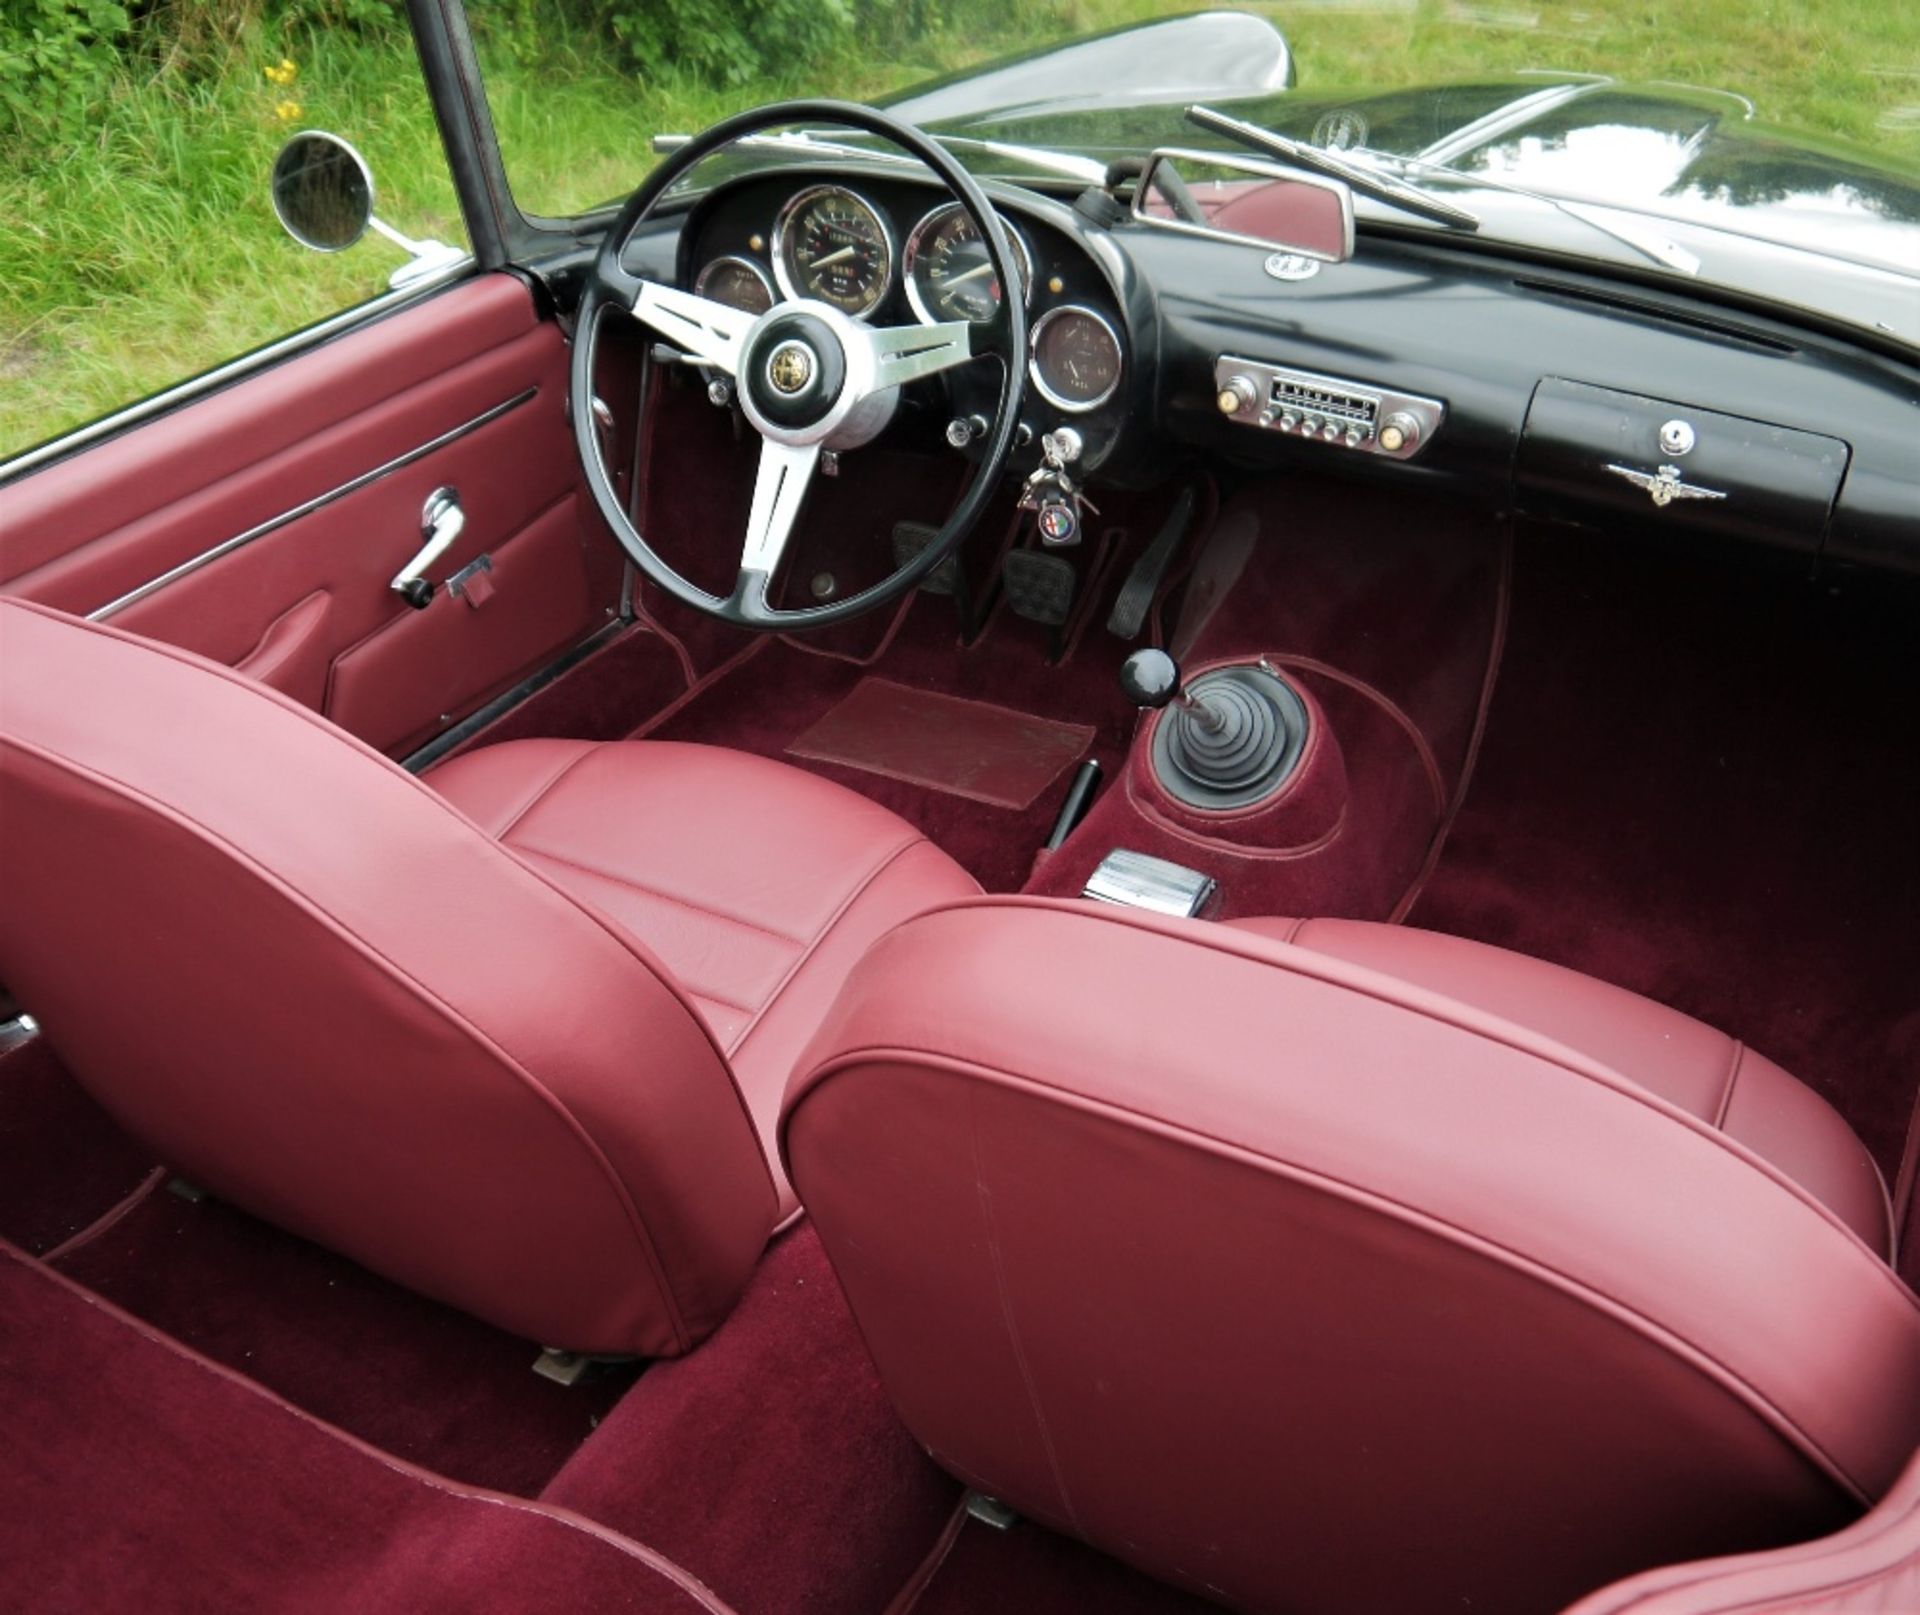 1960 ALFA ROMEO TOURING SPIDER Registration Number: 307 XVJ Chassis Number: AR*10204*000517 Recorded - Image 30 of 36